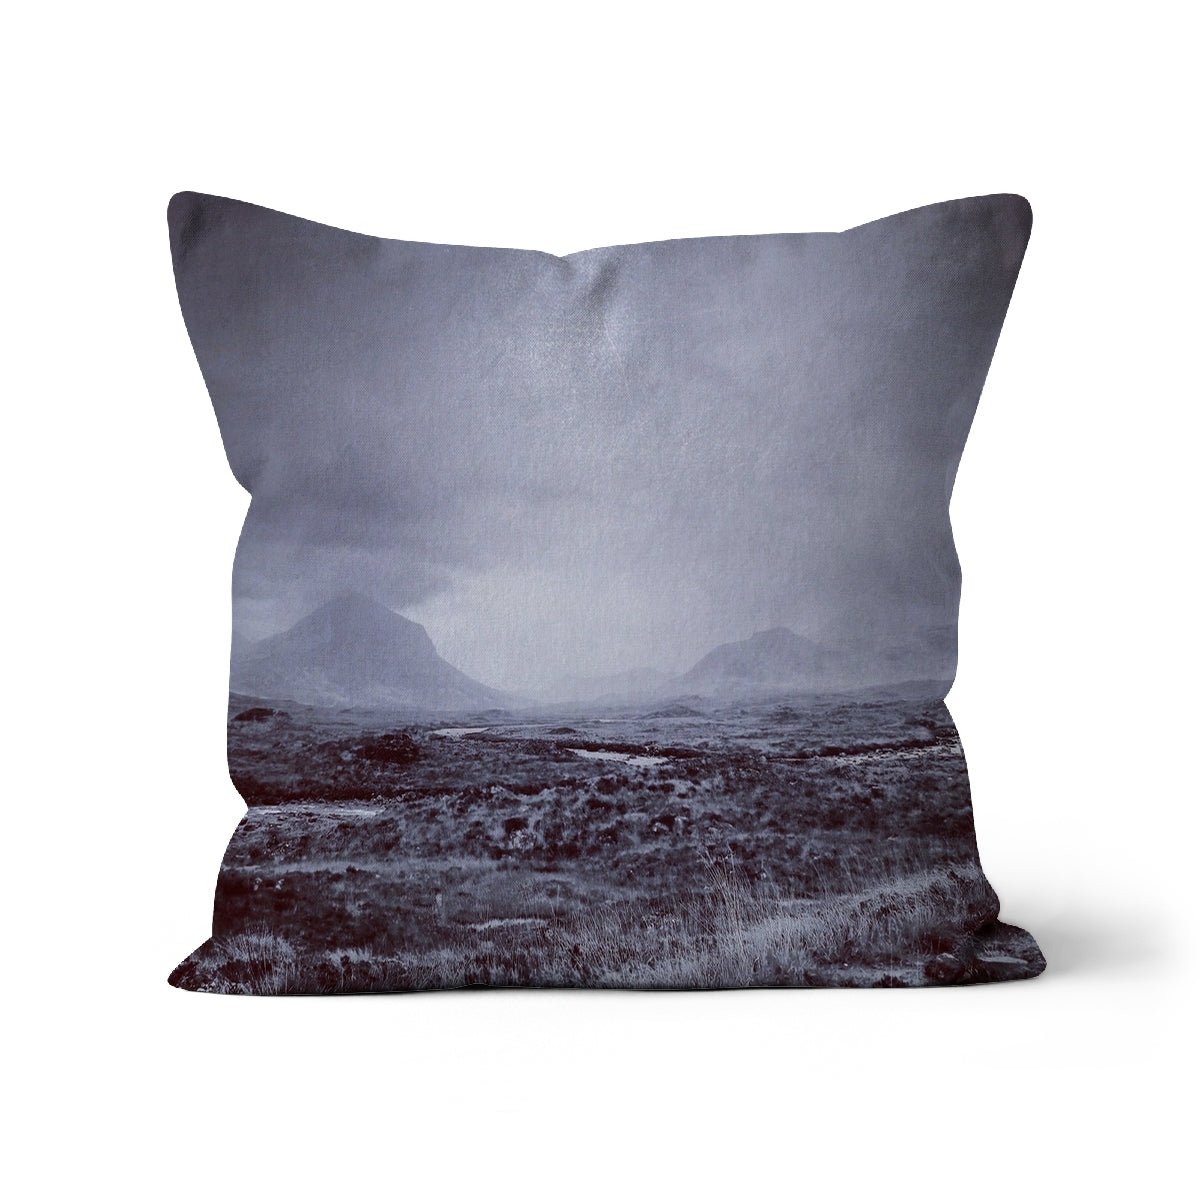 The Brooding Cuillin Skye Art Gifts Cushion-Cushions-Skye Art Gallery-Canvas-24"x24"-Paintings, Prints, Homeware, Art Gifts From Scotland By Scottish Artist Kevin Hunter